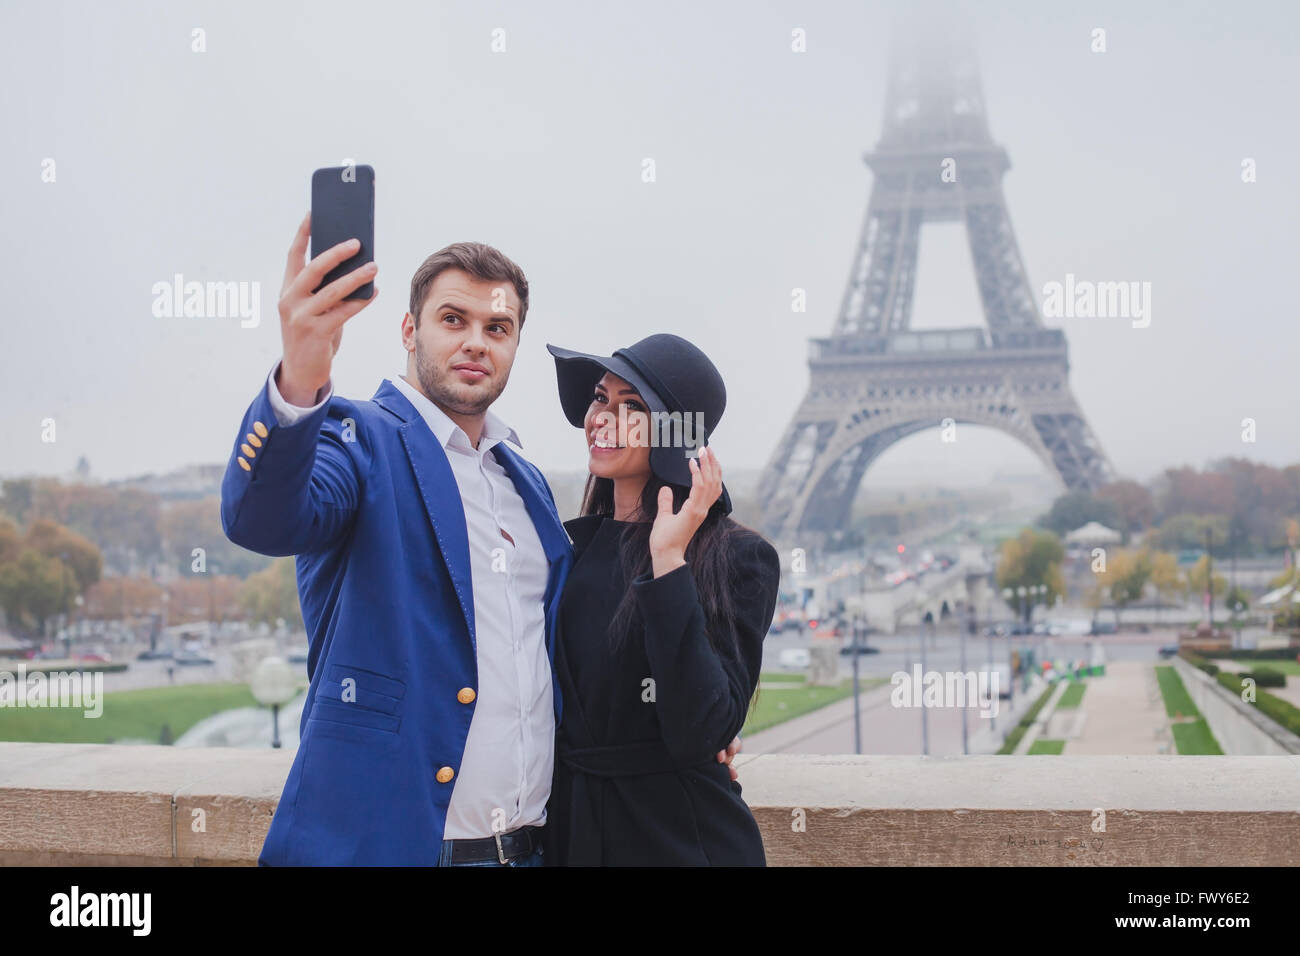 couple of tourists taking photo with Eiffel Tower in Paris, selfie, tourism in Europe, France Stock Photo